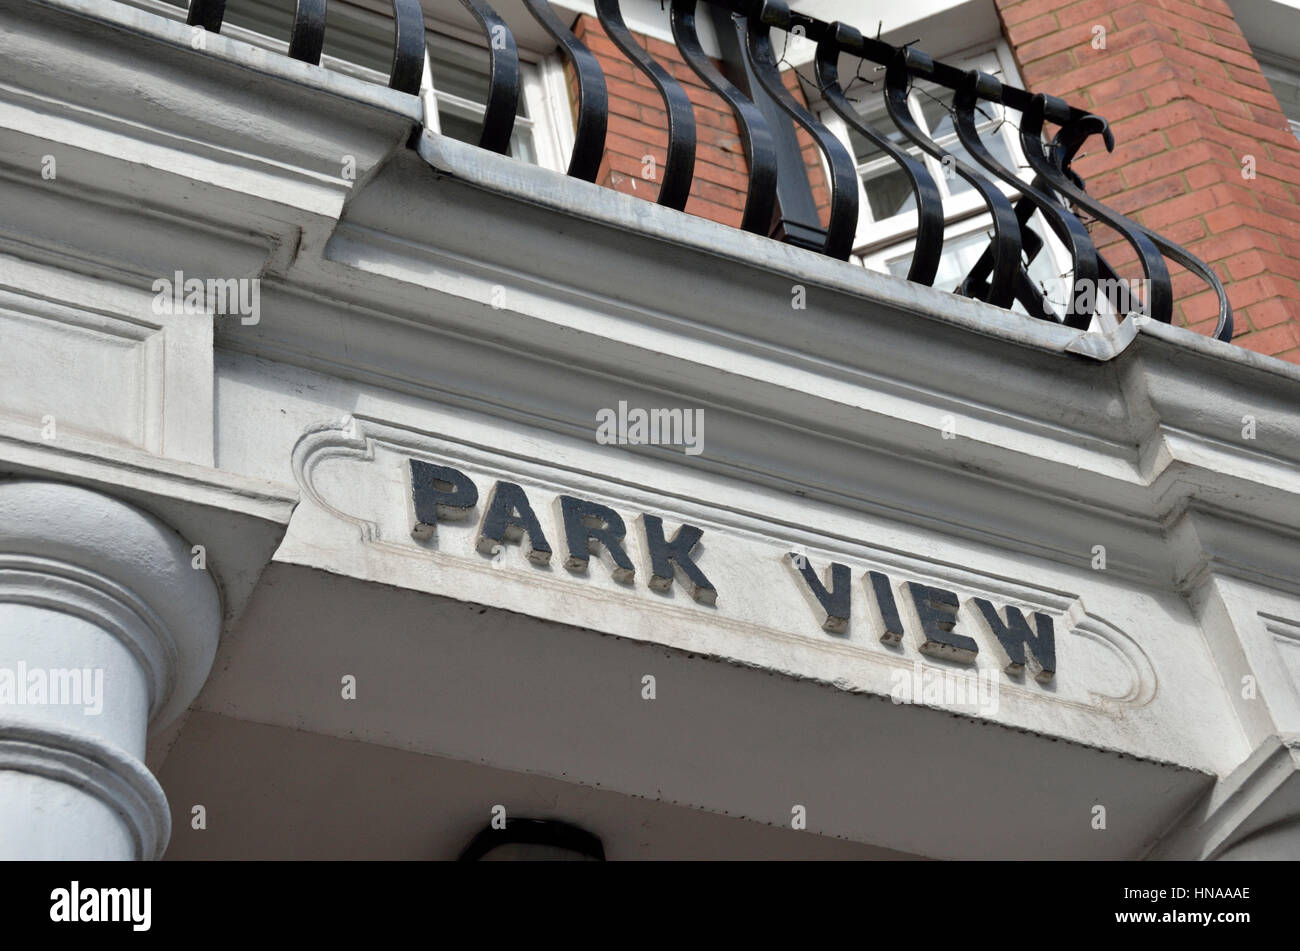 Park view sign outside a residential property. London, UK. Stock Photo